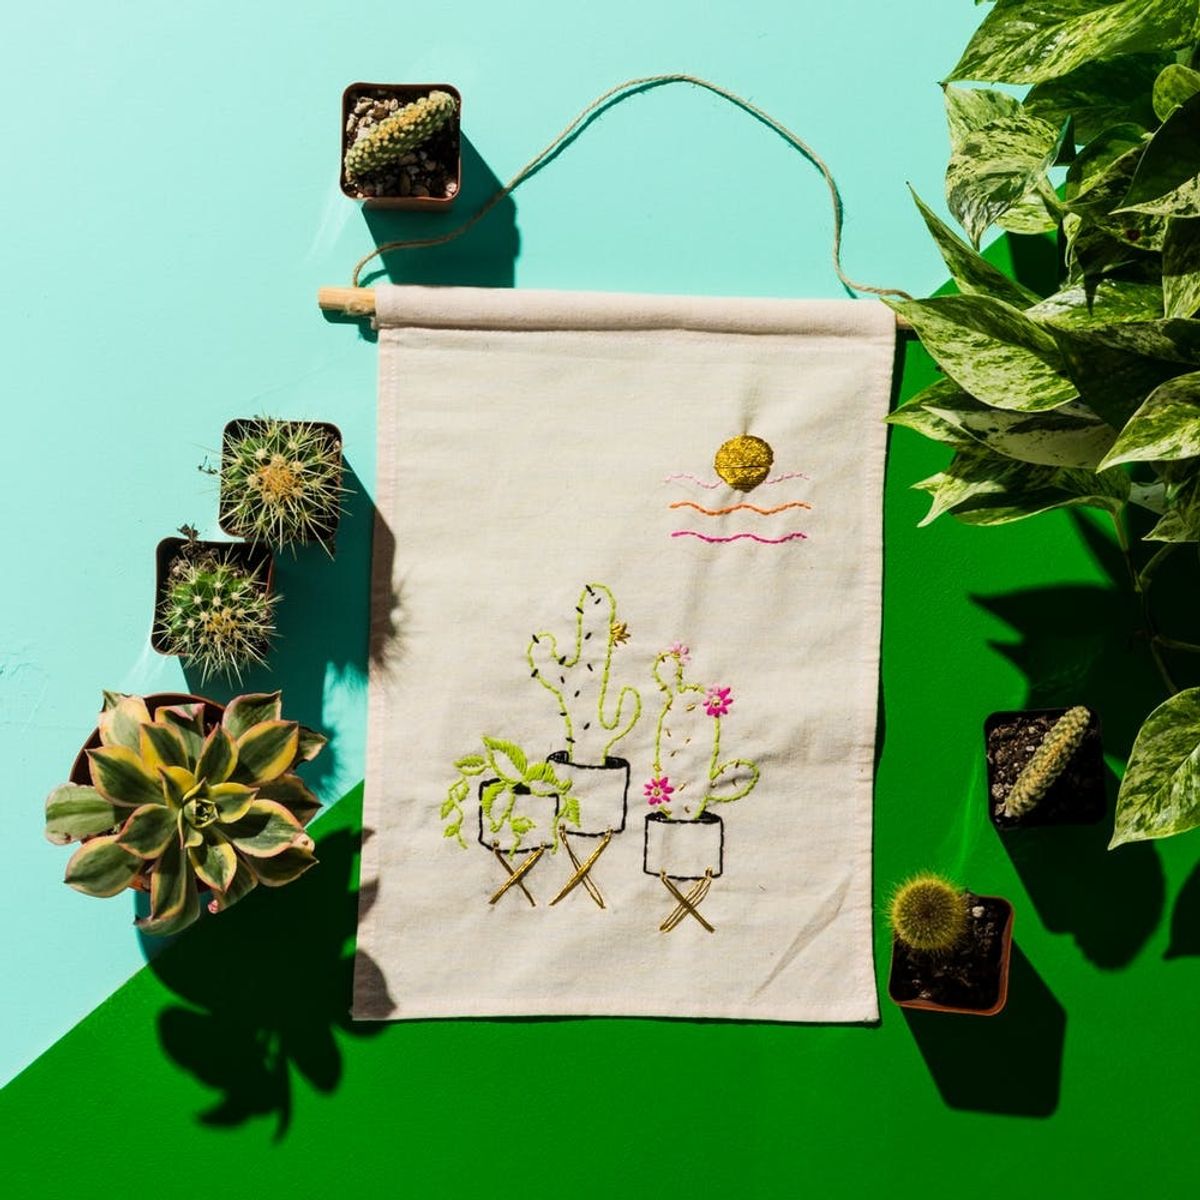 Personalize Your Home With a DIY Embroidered Wall Hanging